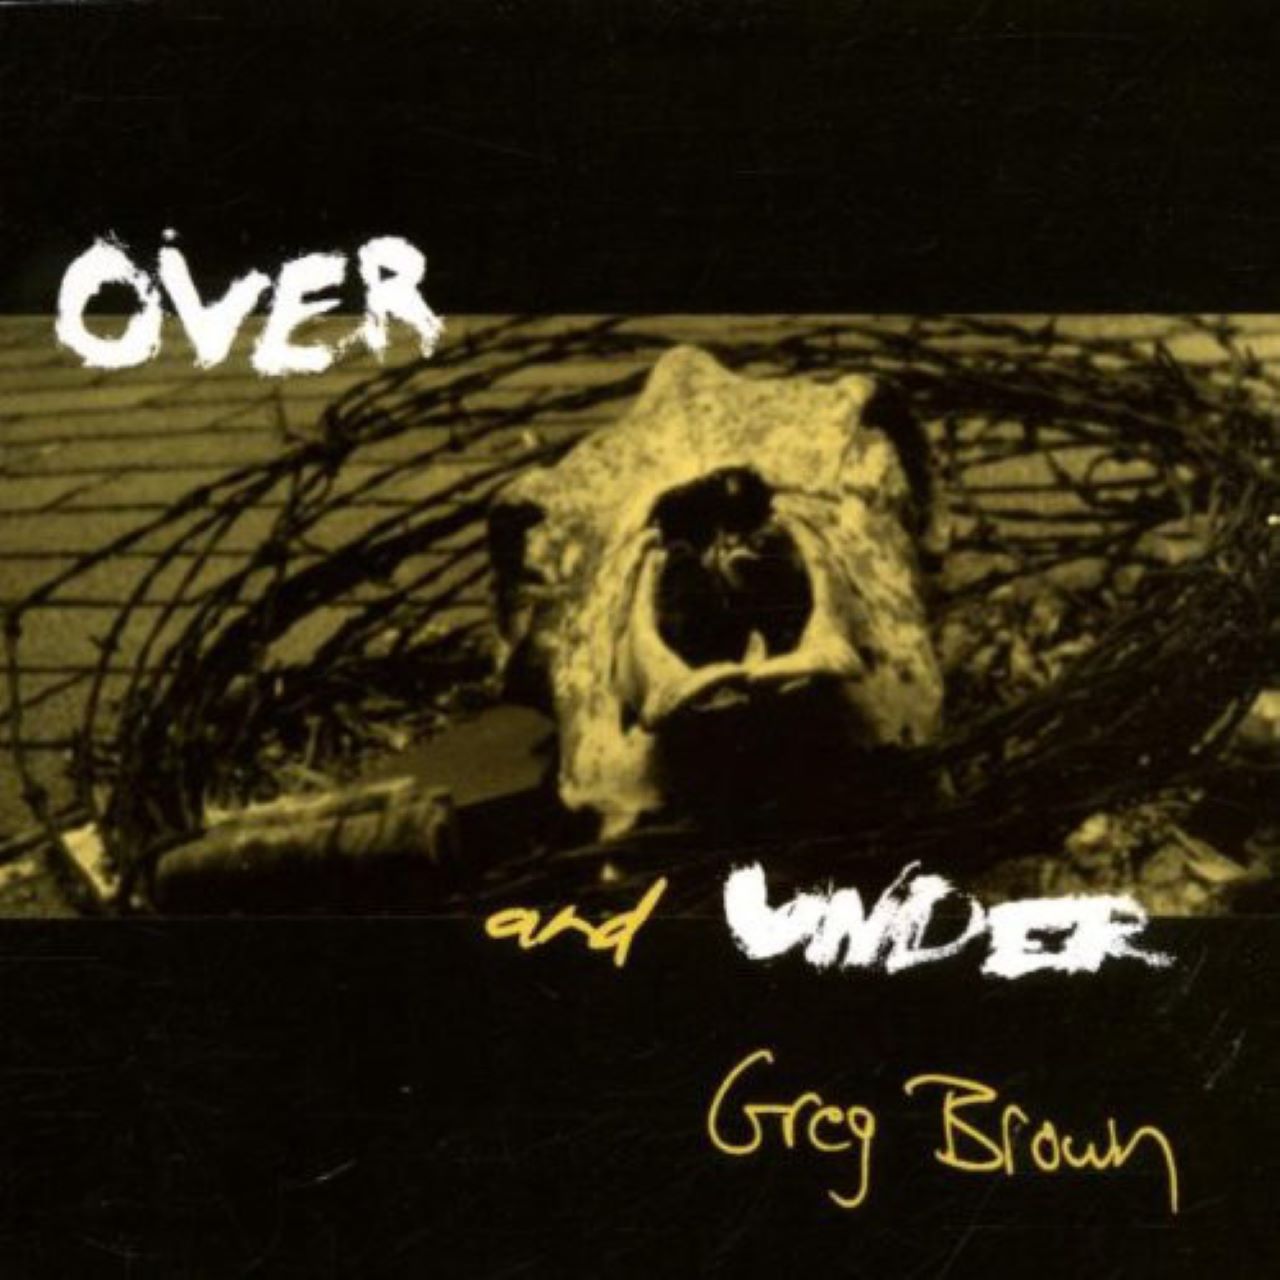 Greg Brown - Over And Under cover album